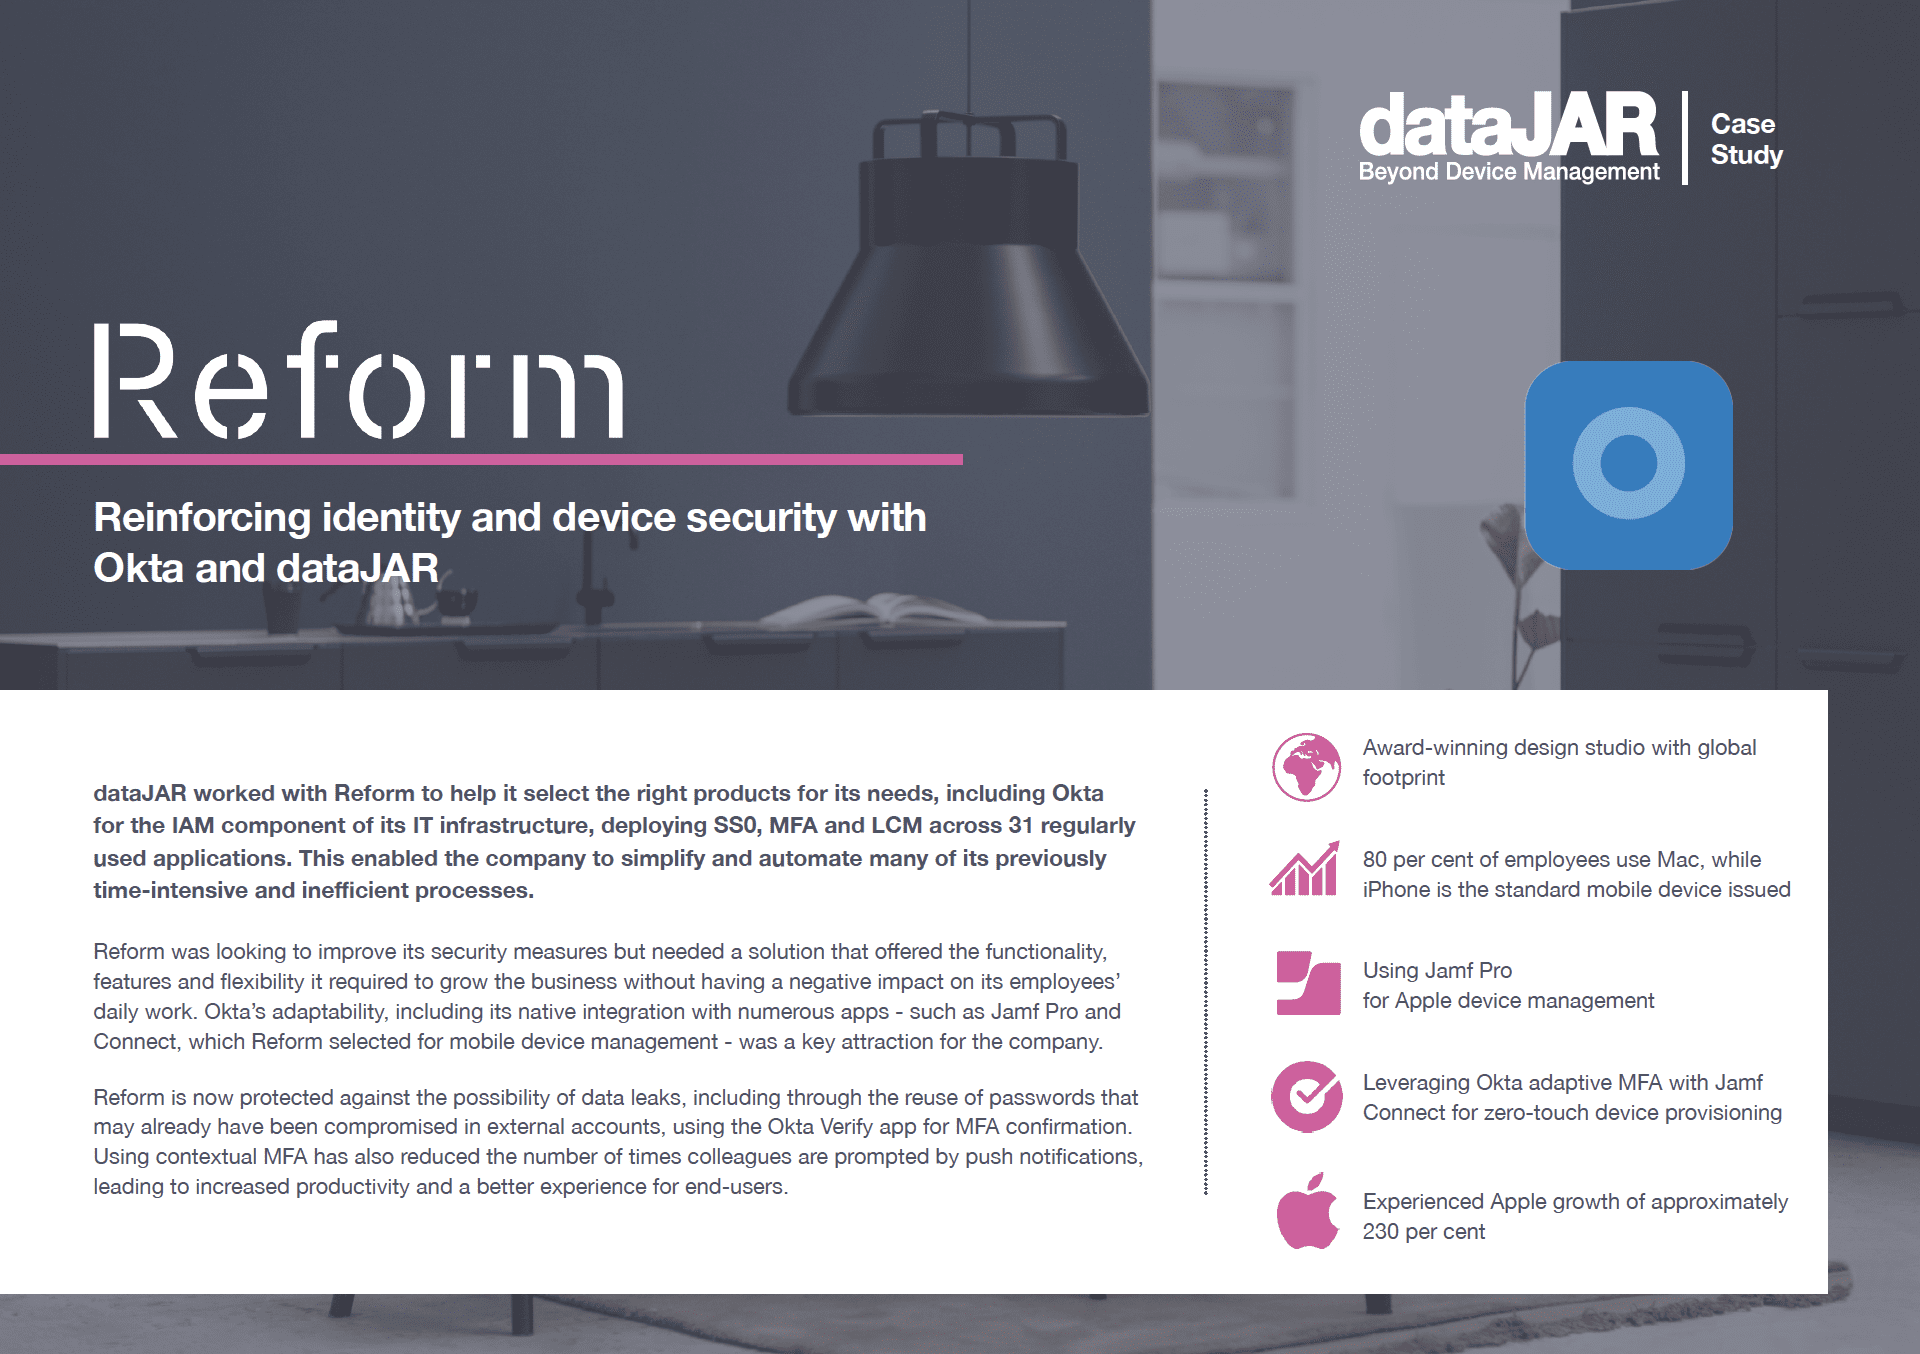 Reform - Reinforcing identity and device security with Okta and dataJAR